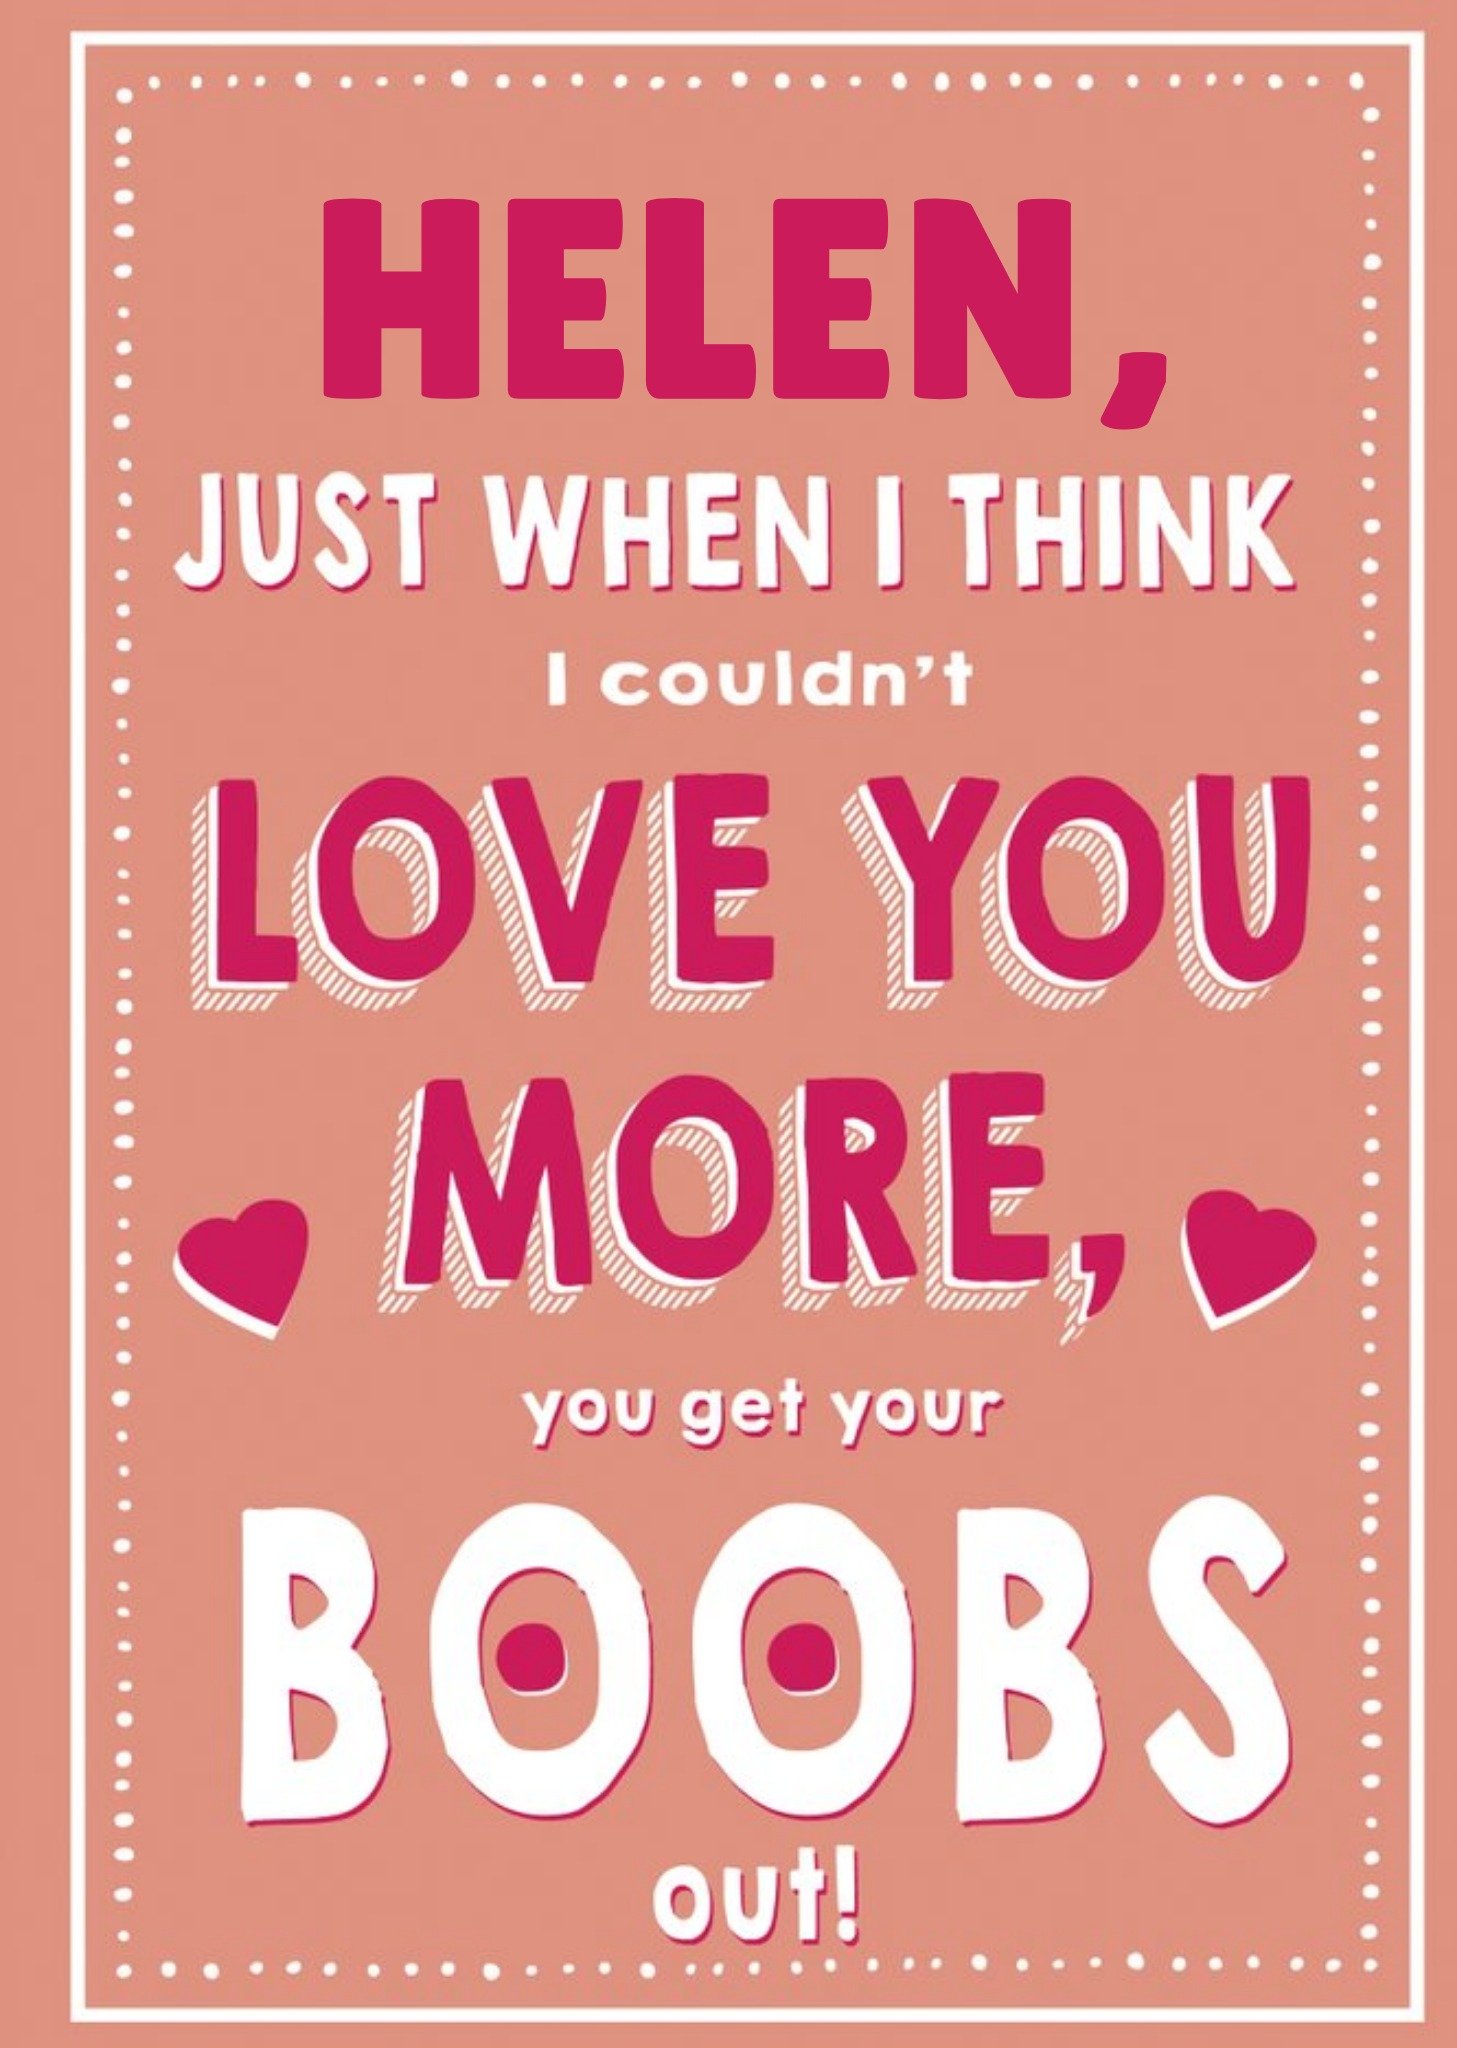 Moonpig Jam And Toast Couldn't Love You More Funny Valentines Day Card, Large